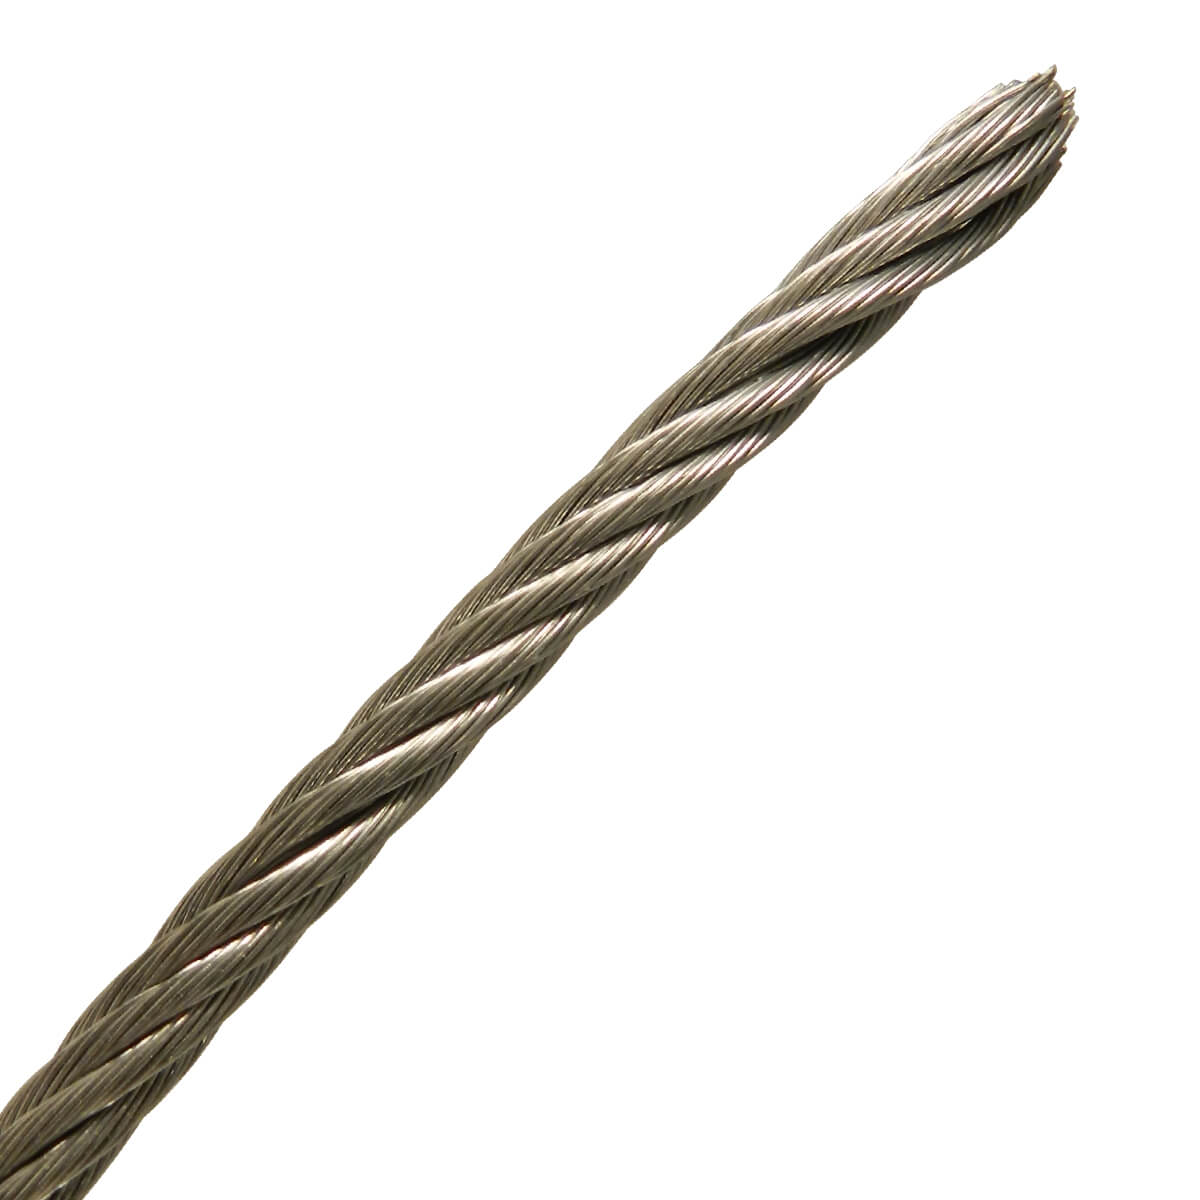 Cable 7 x 19 - Plastic Coated - 3/32-in - Price / ft